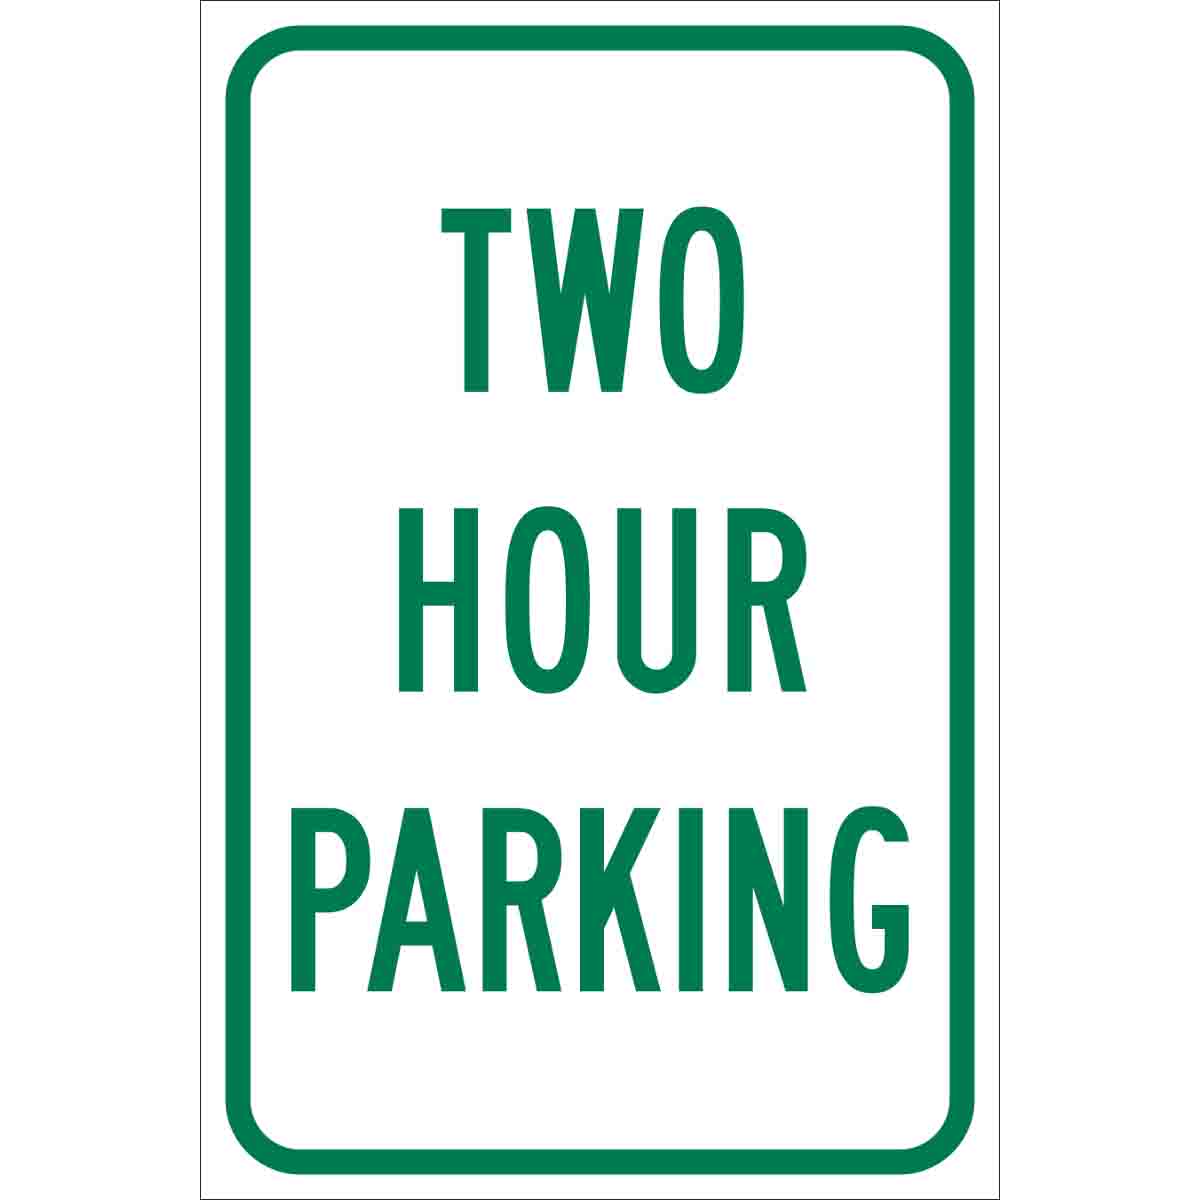 TWO HOUR PARKING HIP